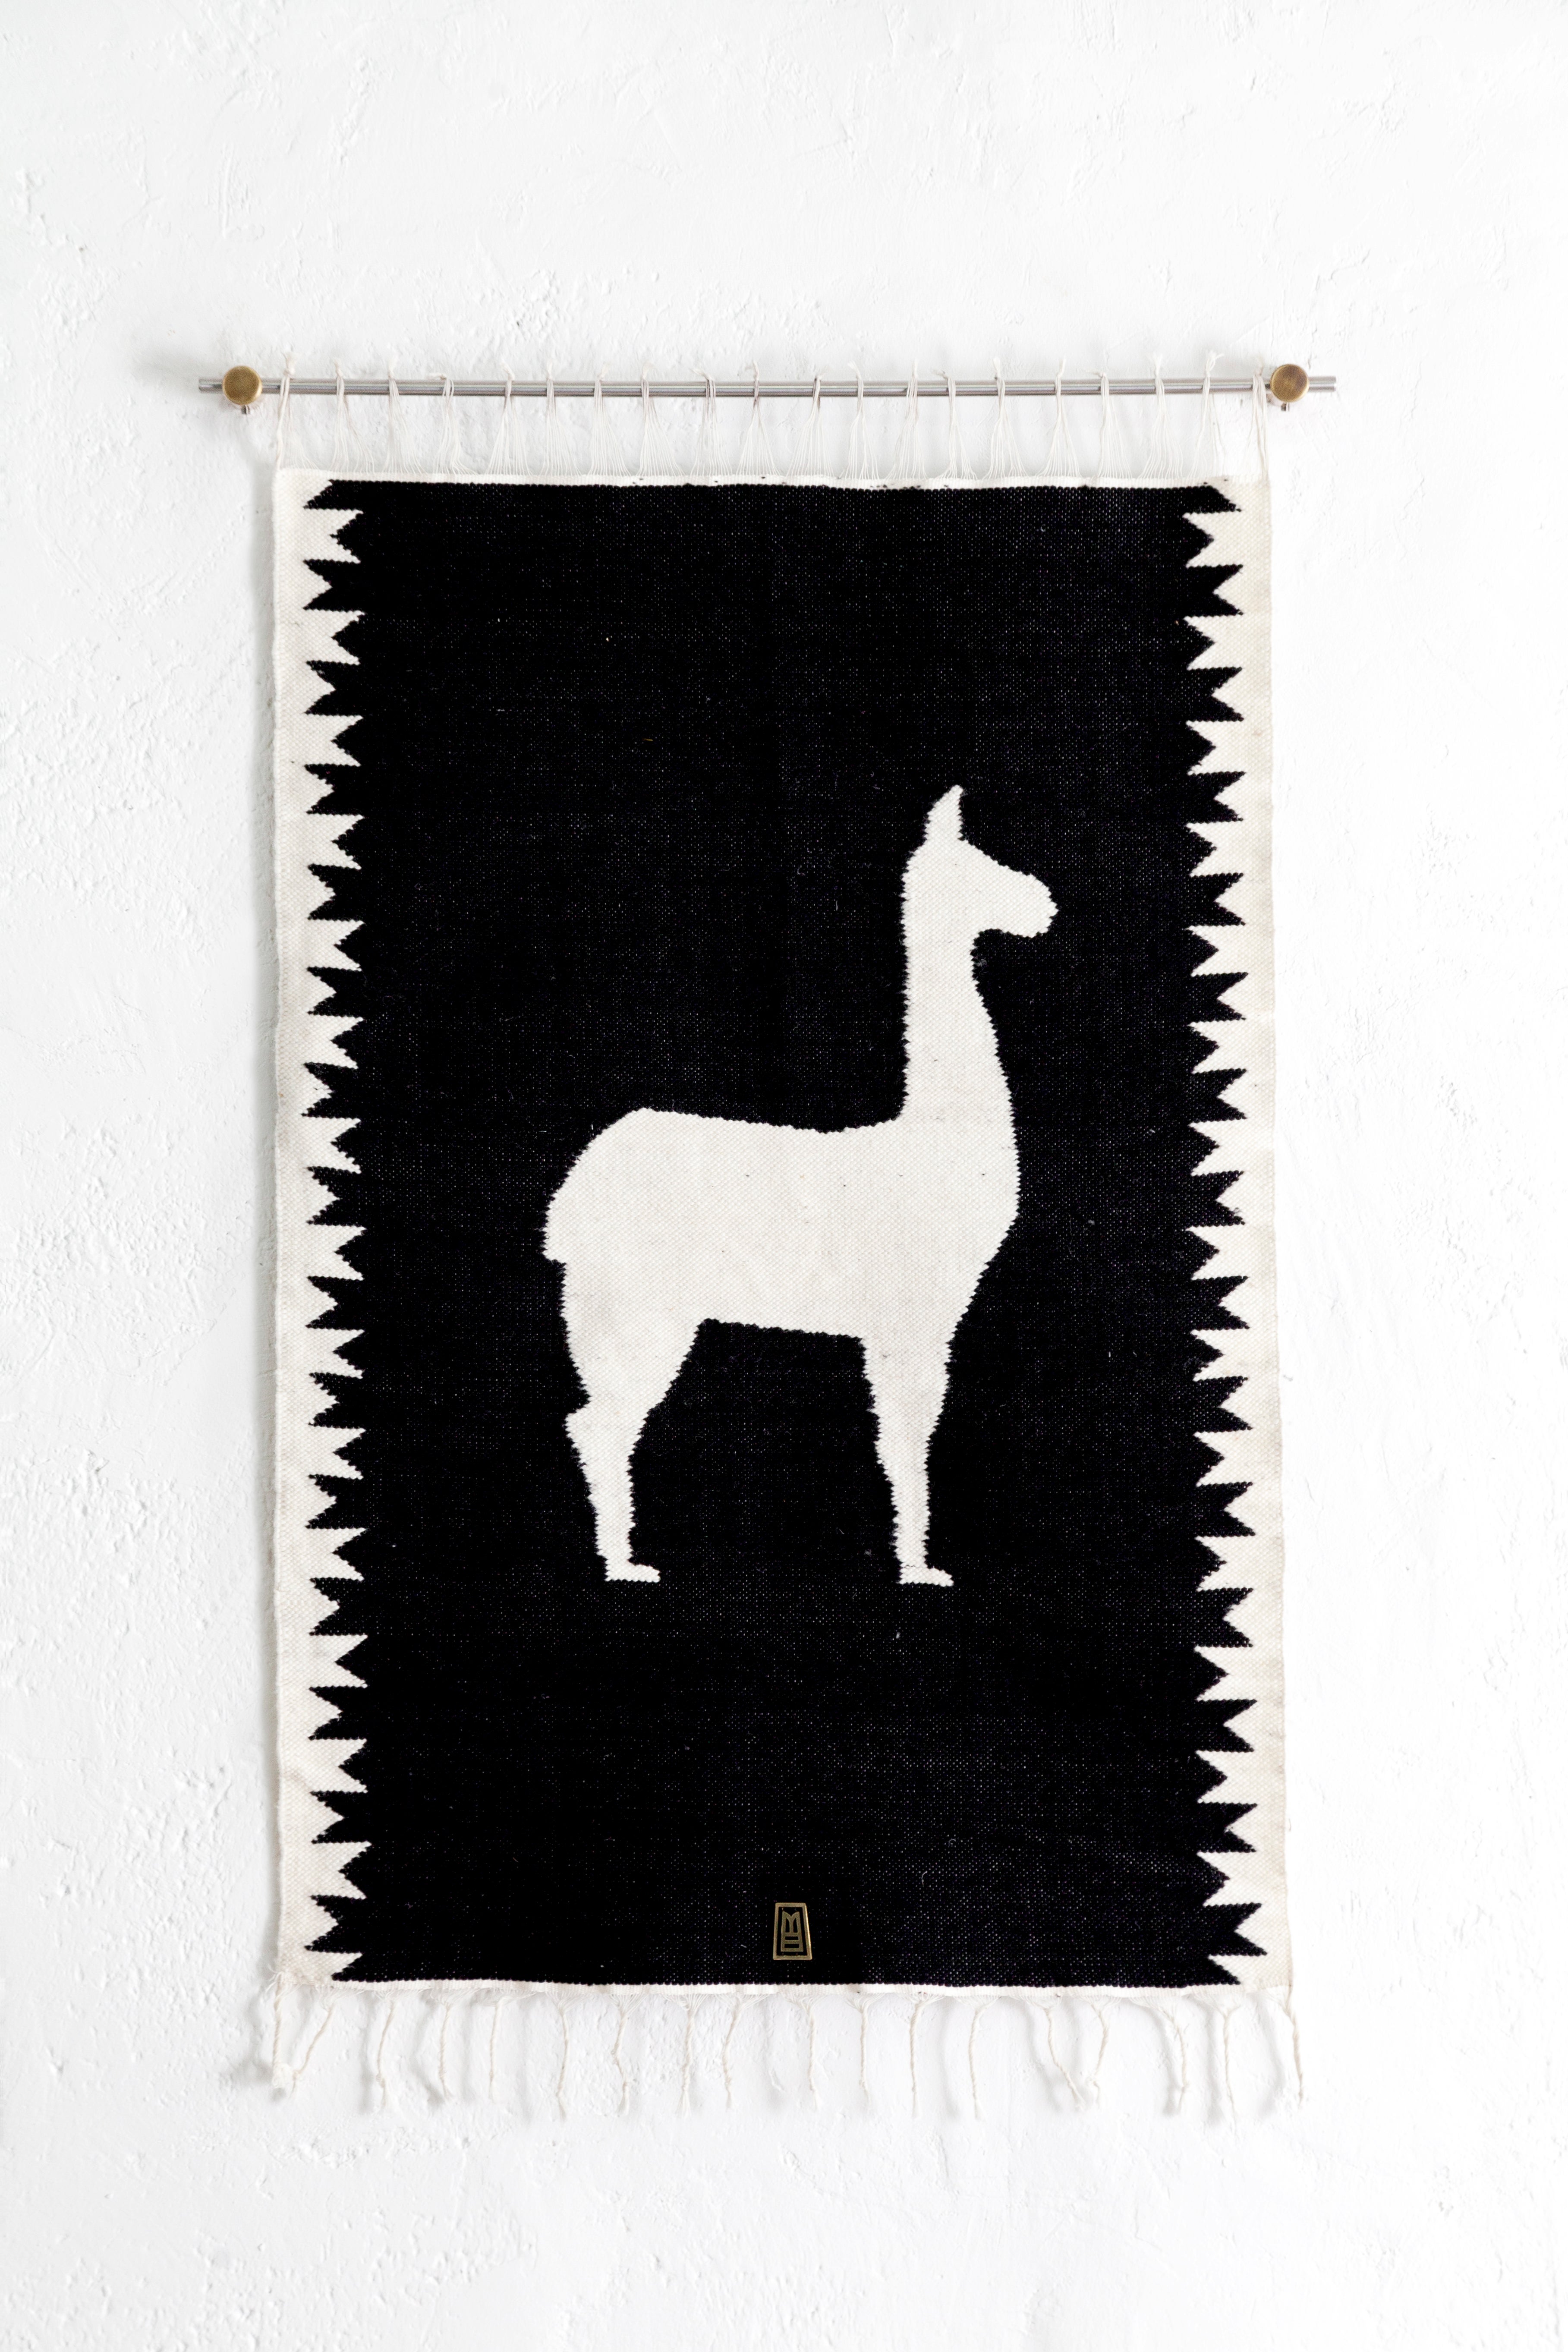 LLAMA Sheep Wool Handwoven Tapestry, Bronze w Stainless Steel Wall Mount, Black For Sale